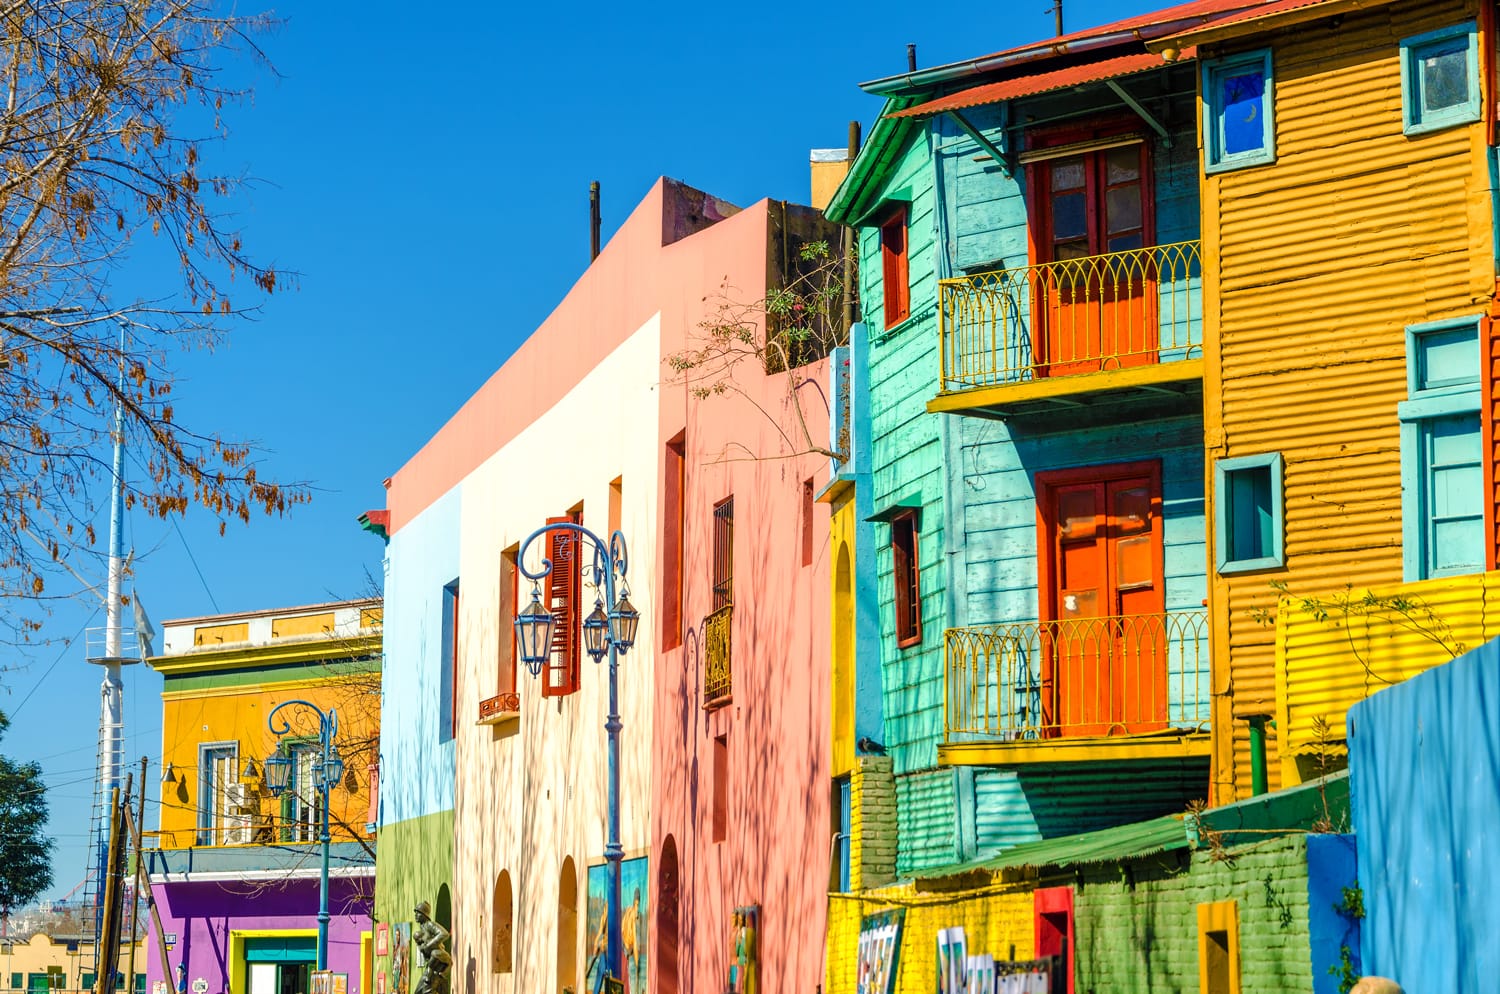 Bright colors of Caminito street in La Boca neighborhood of Buenos Aires, Argentina